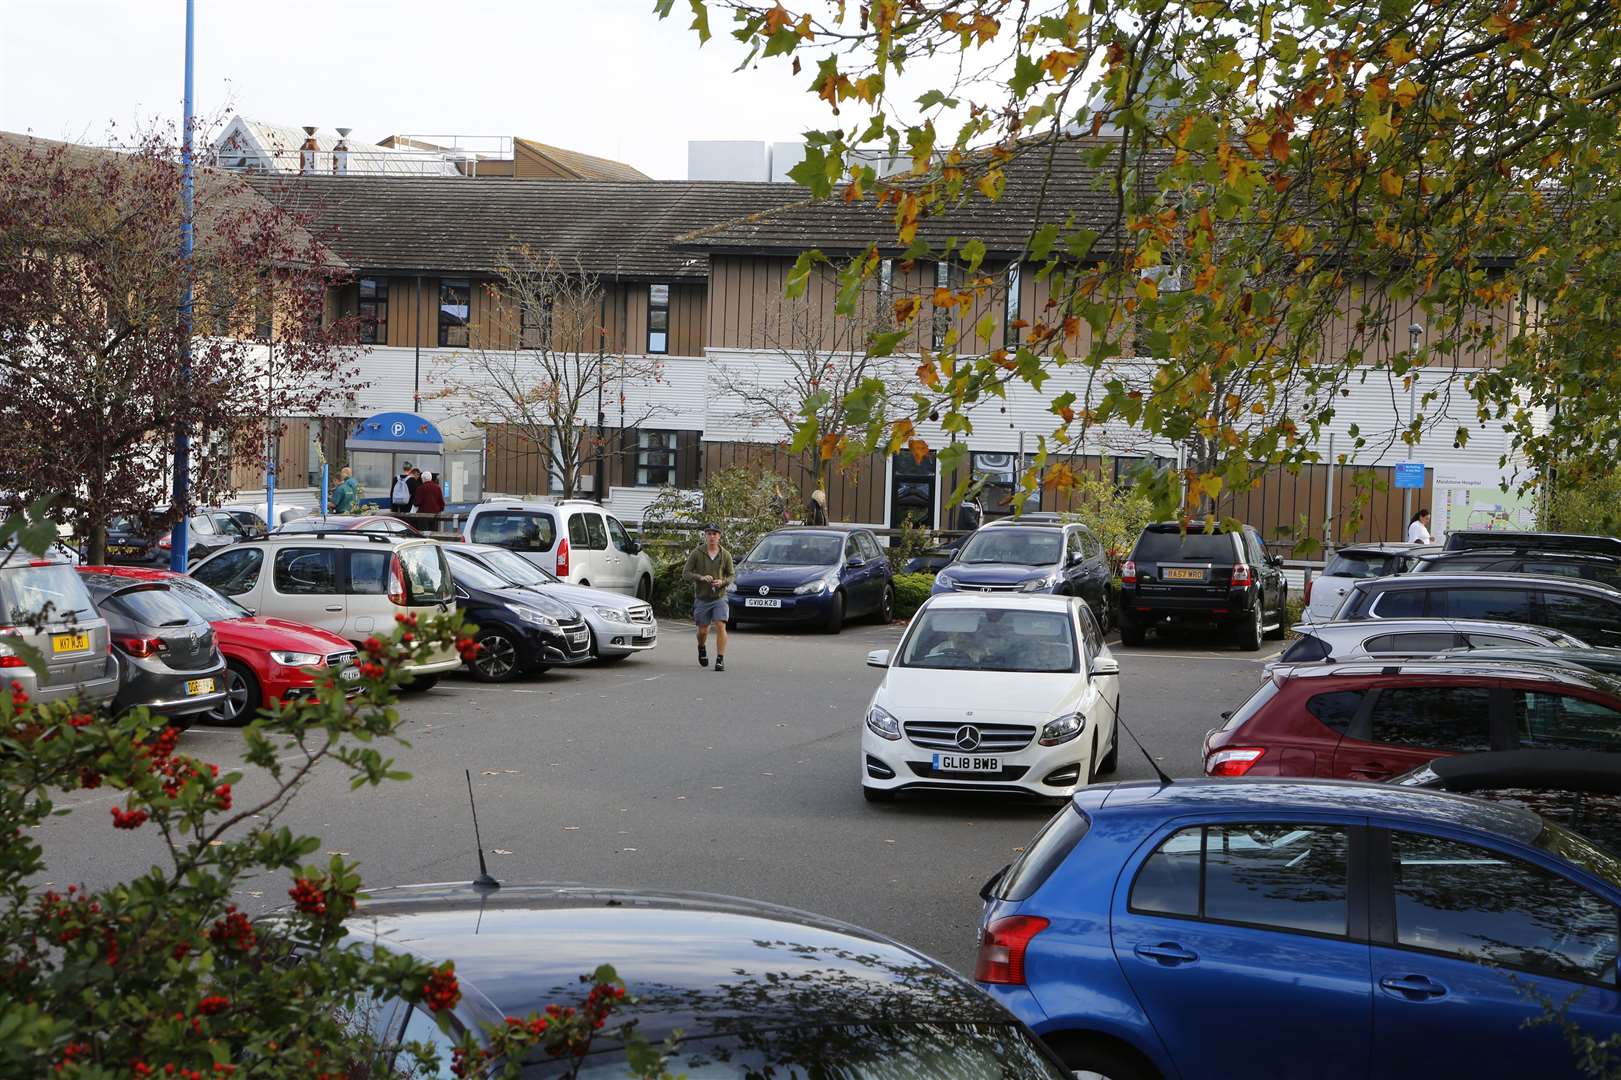 The Smiths had to pay an extra £2 for their parking at Maidstone Hospital this morning